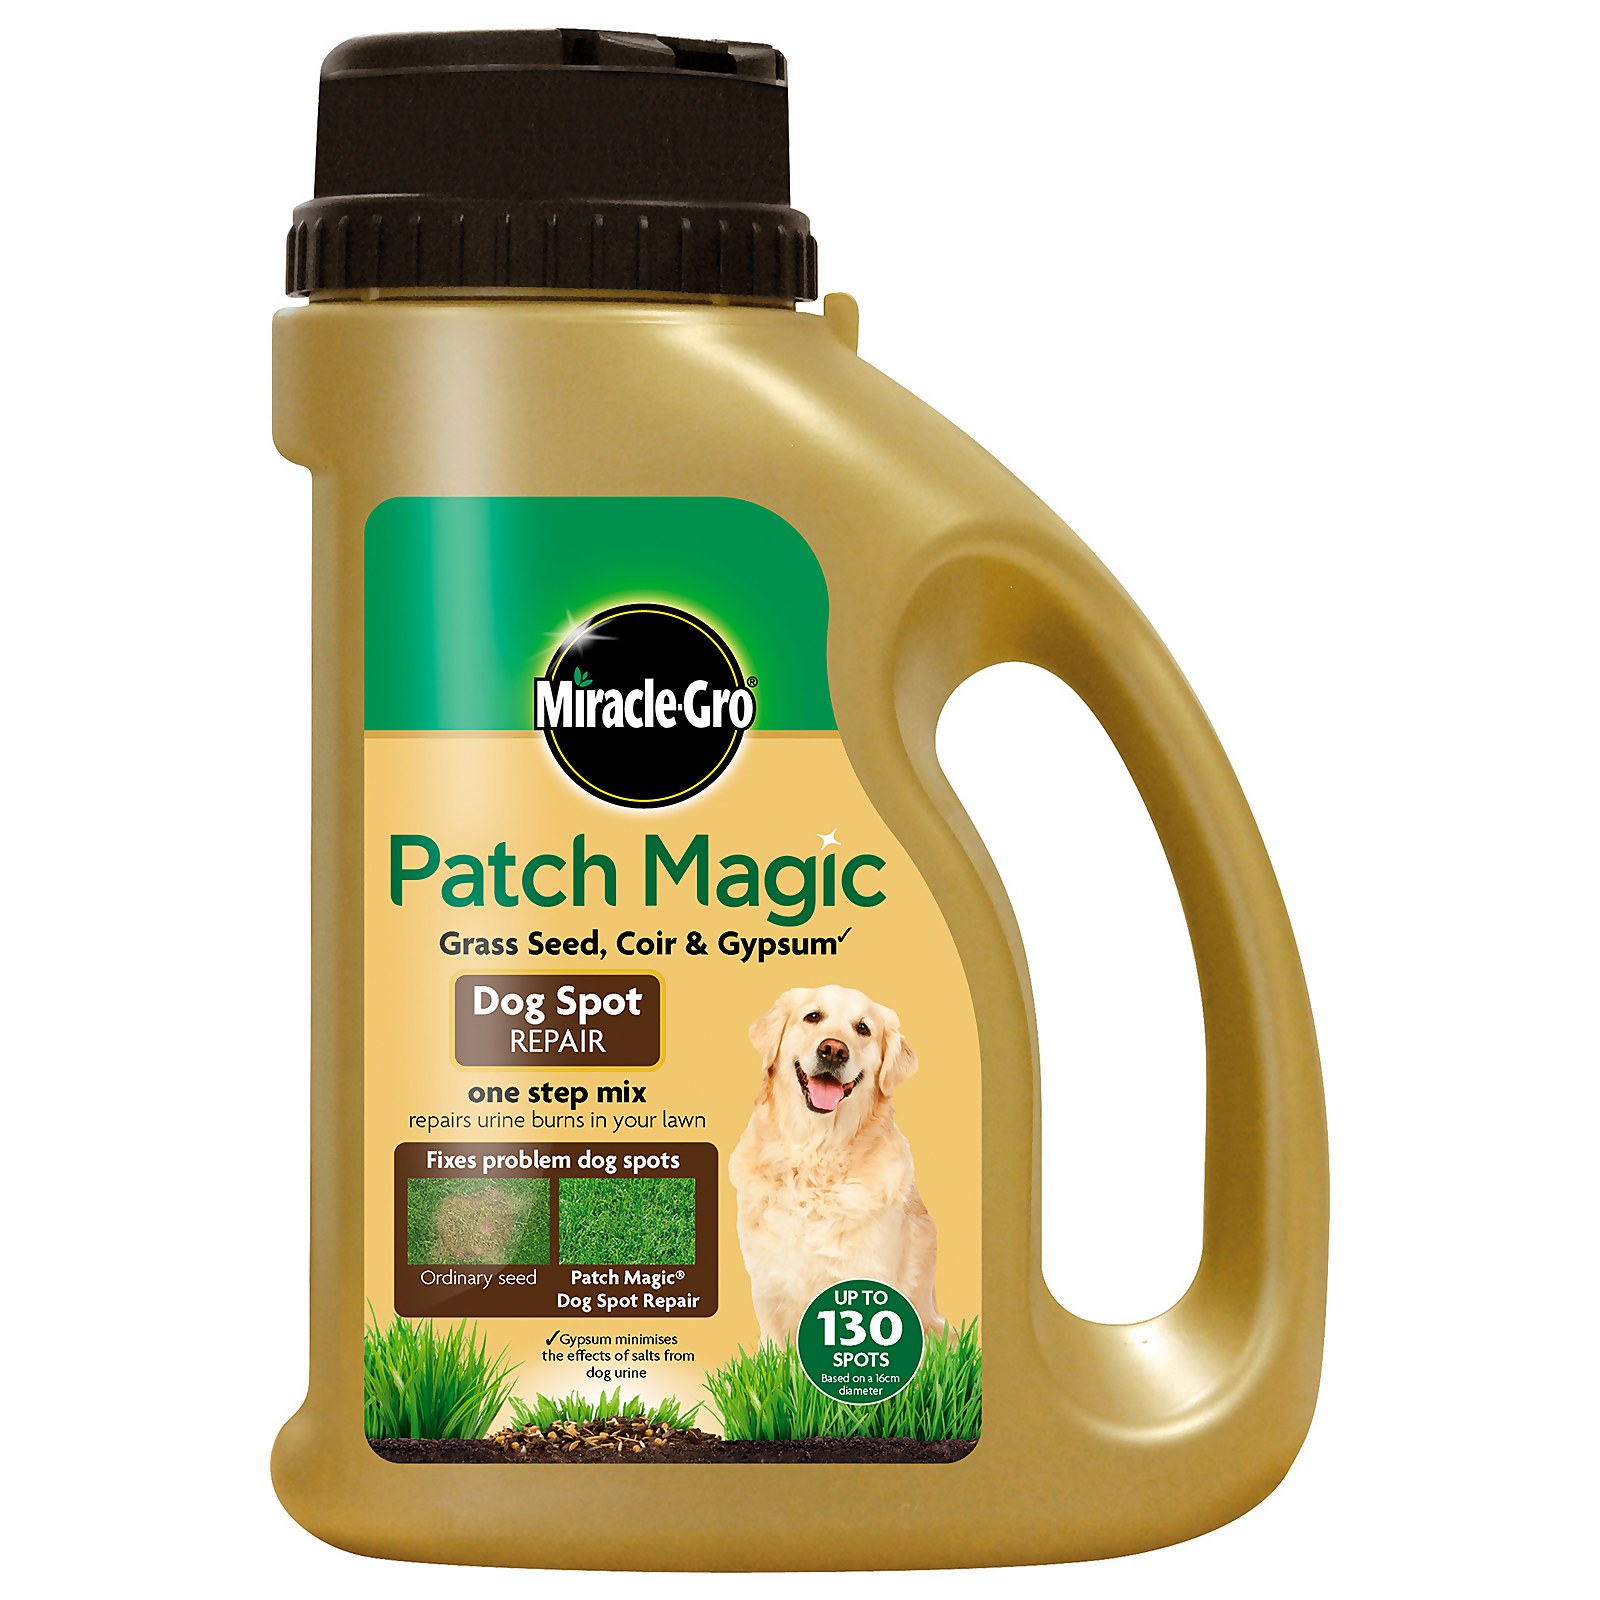 Photo of Miracle-gro Patch Magic Dog Spot Repair Grass Seed - 130 Spots